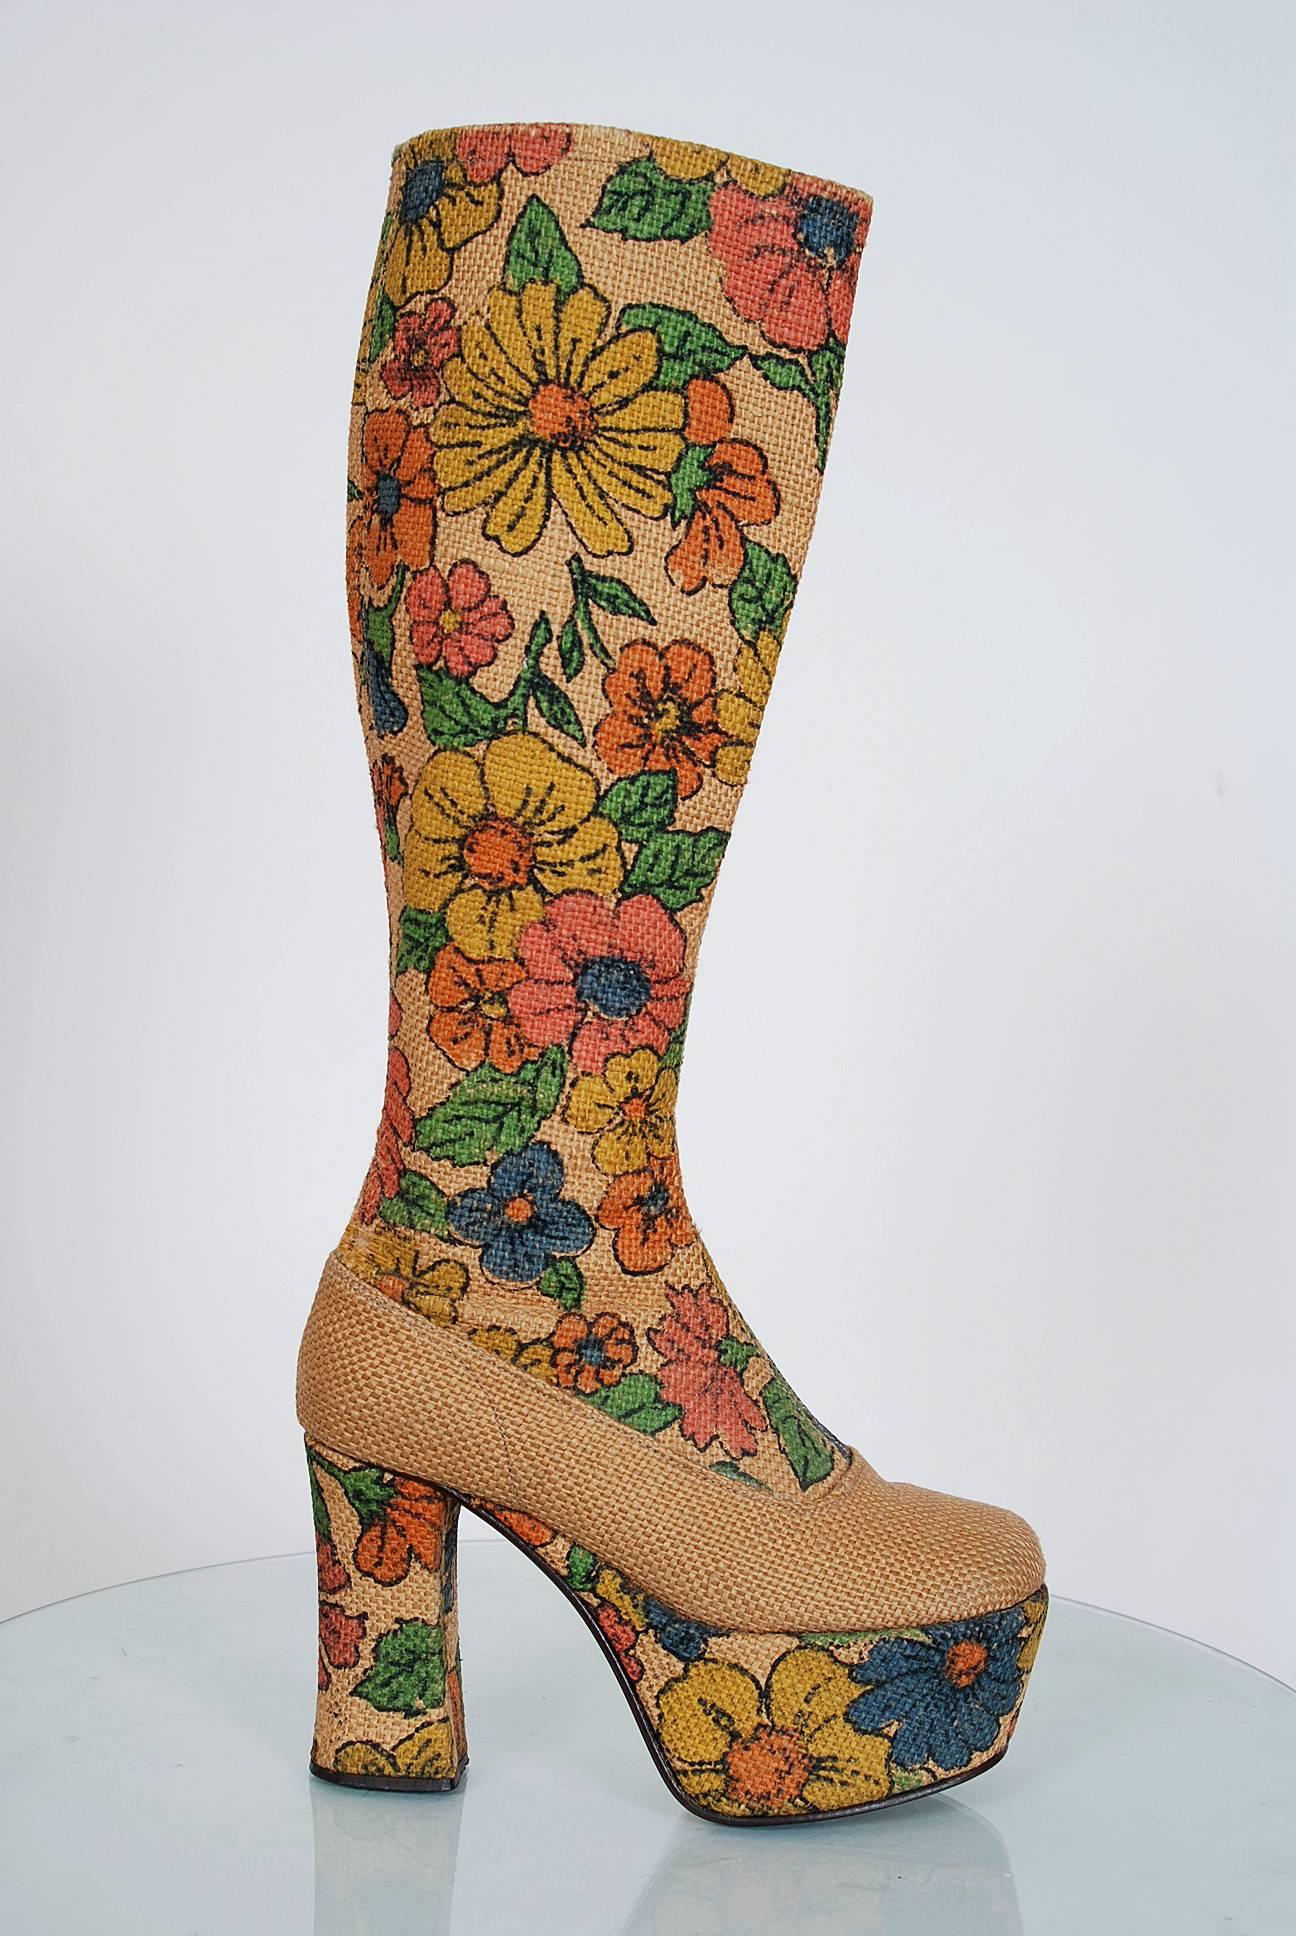 Amazing early 1970's American designer barkcloth boots in the most incredible floral-garden pattern! These boots have unbelievable stacked wood-platforms with handcrafted work throughout. I love the shaped heel and seductive knee-high design. Boots